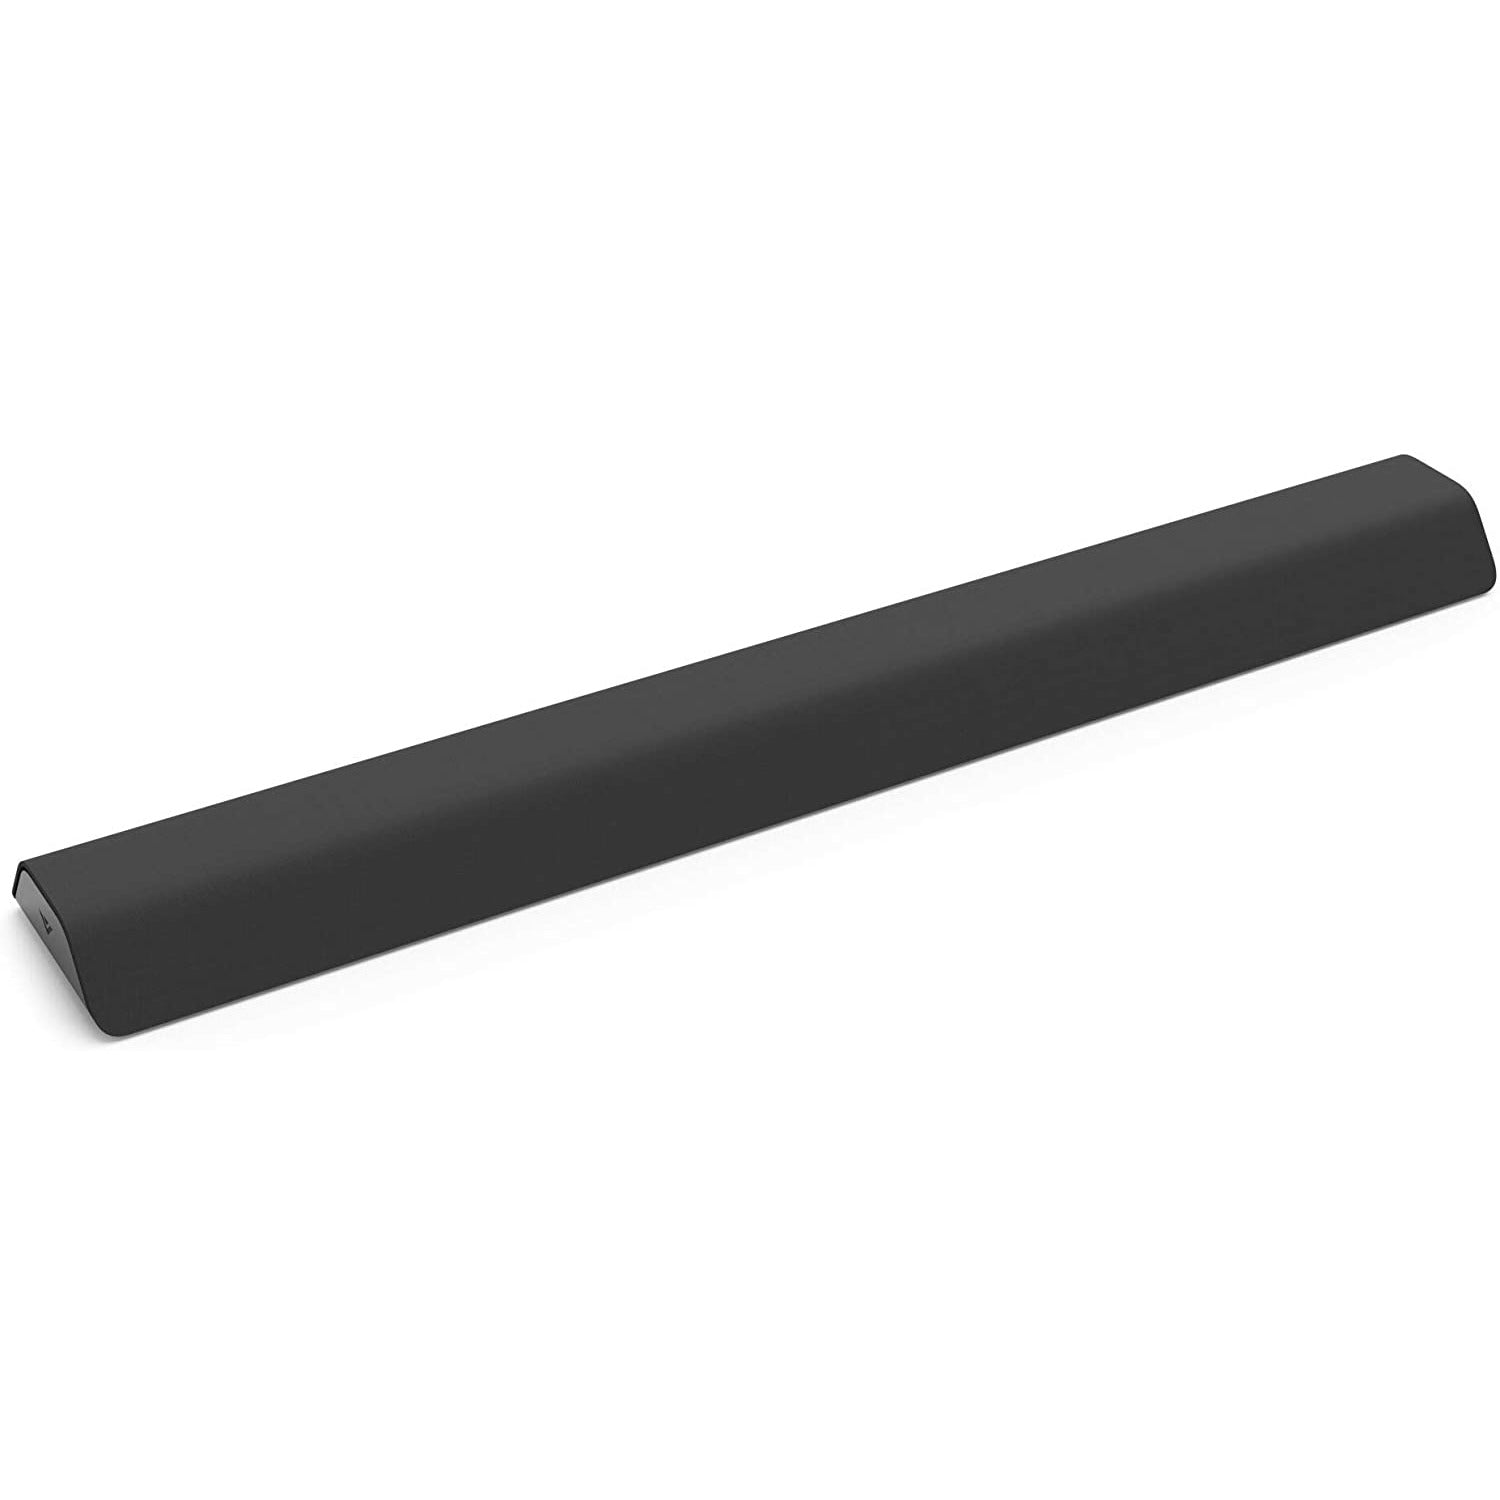 VIZIO Sound Bar for TV, M-Series 36” Surround Sound System for TV, 2.1 Channel Home Audio Sound Bar with Built-in Subwoofers and Bluetooth – 4 M21d-H8R